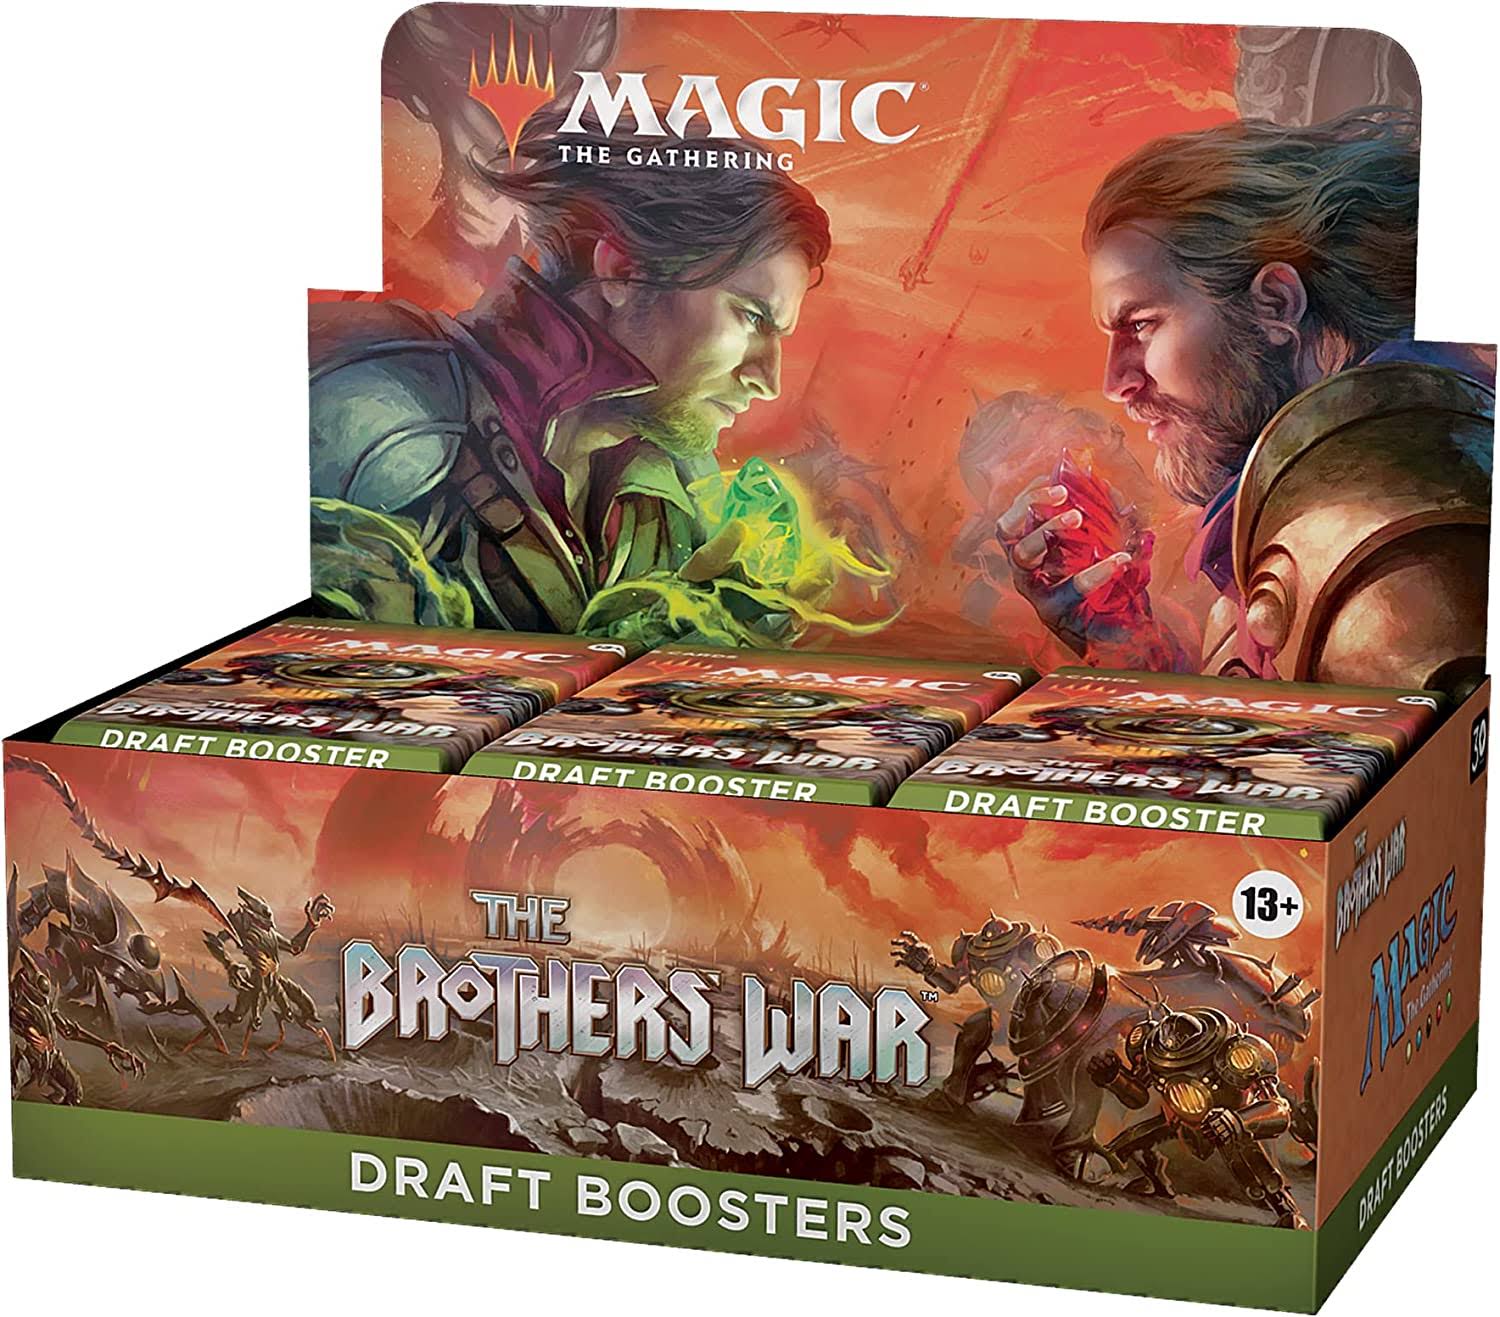 Magic The Gathering - Draft Booster Box The Brothers' War